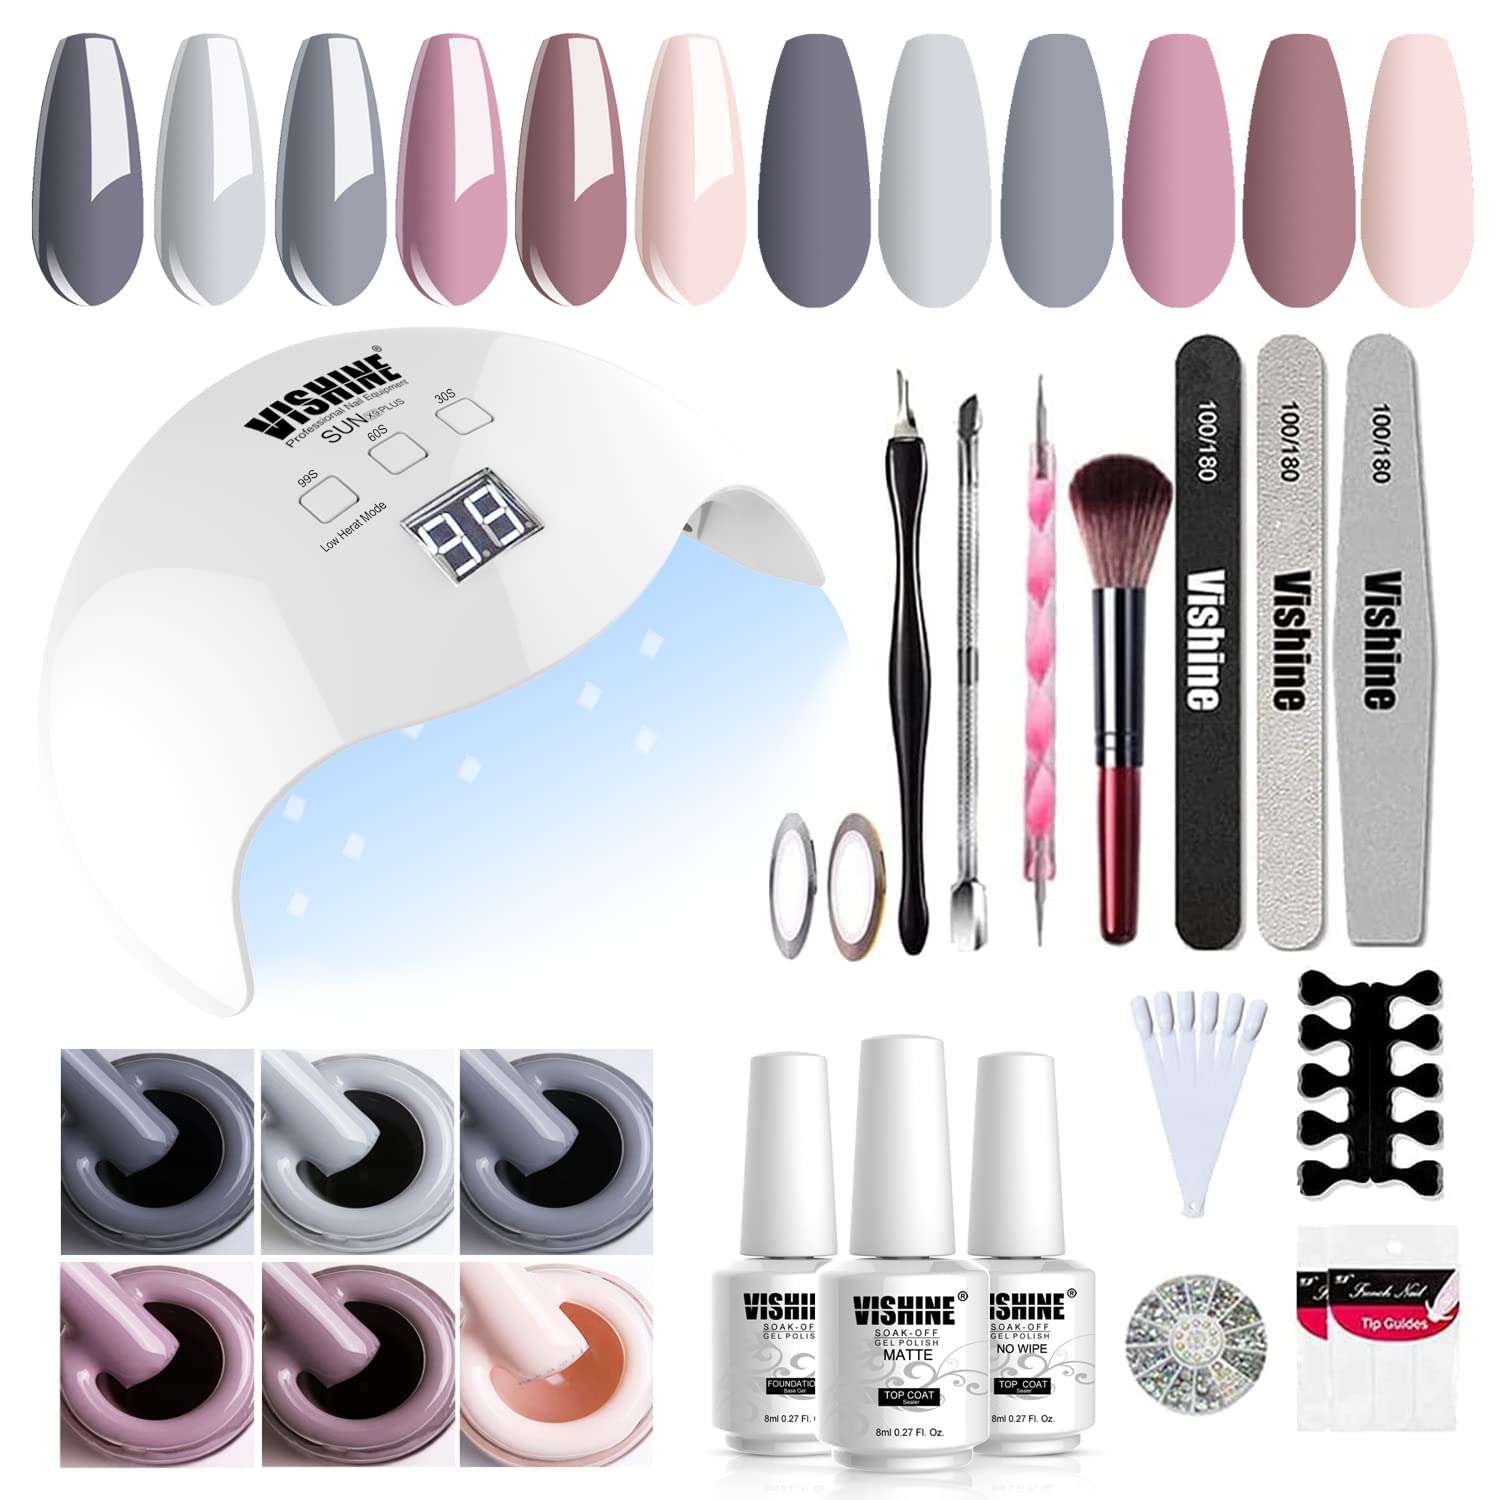 Celebration - All-In-One Gel Nail Polish Kit - Gift for Mother's Day【F